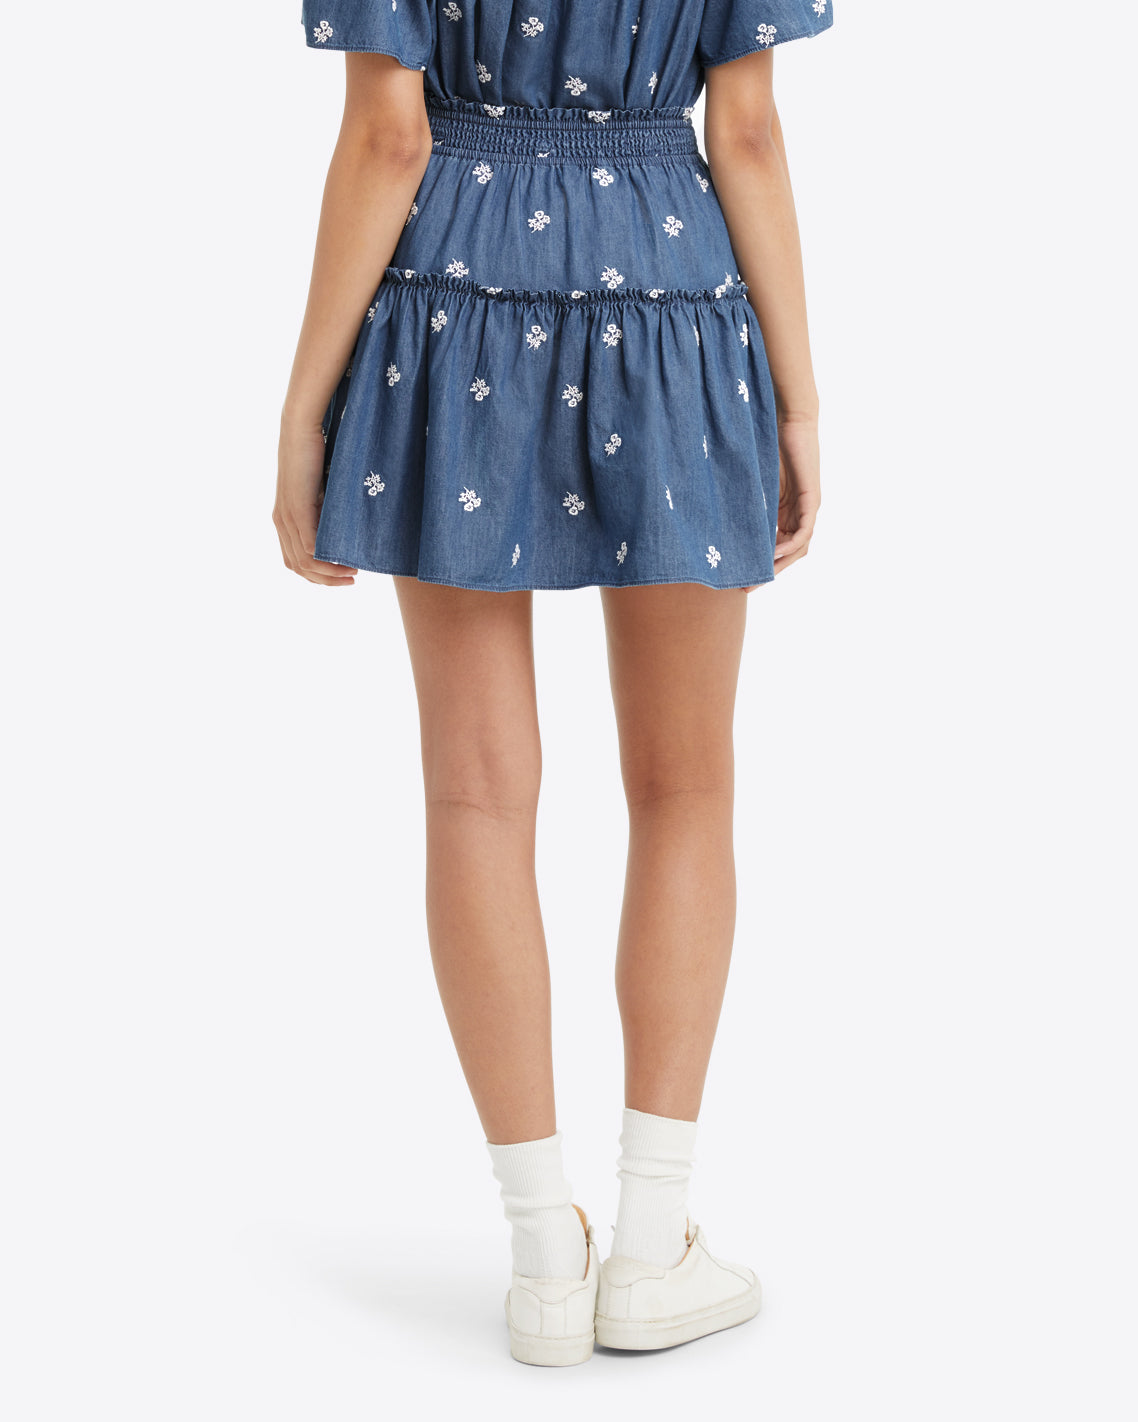 Pull on Skirt in Embroidered Chambray